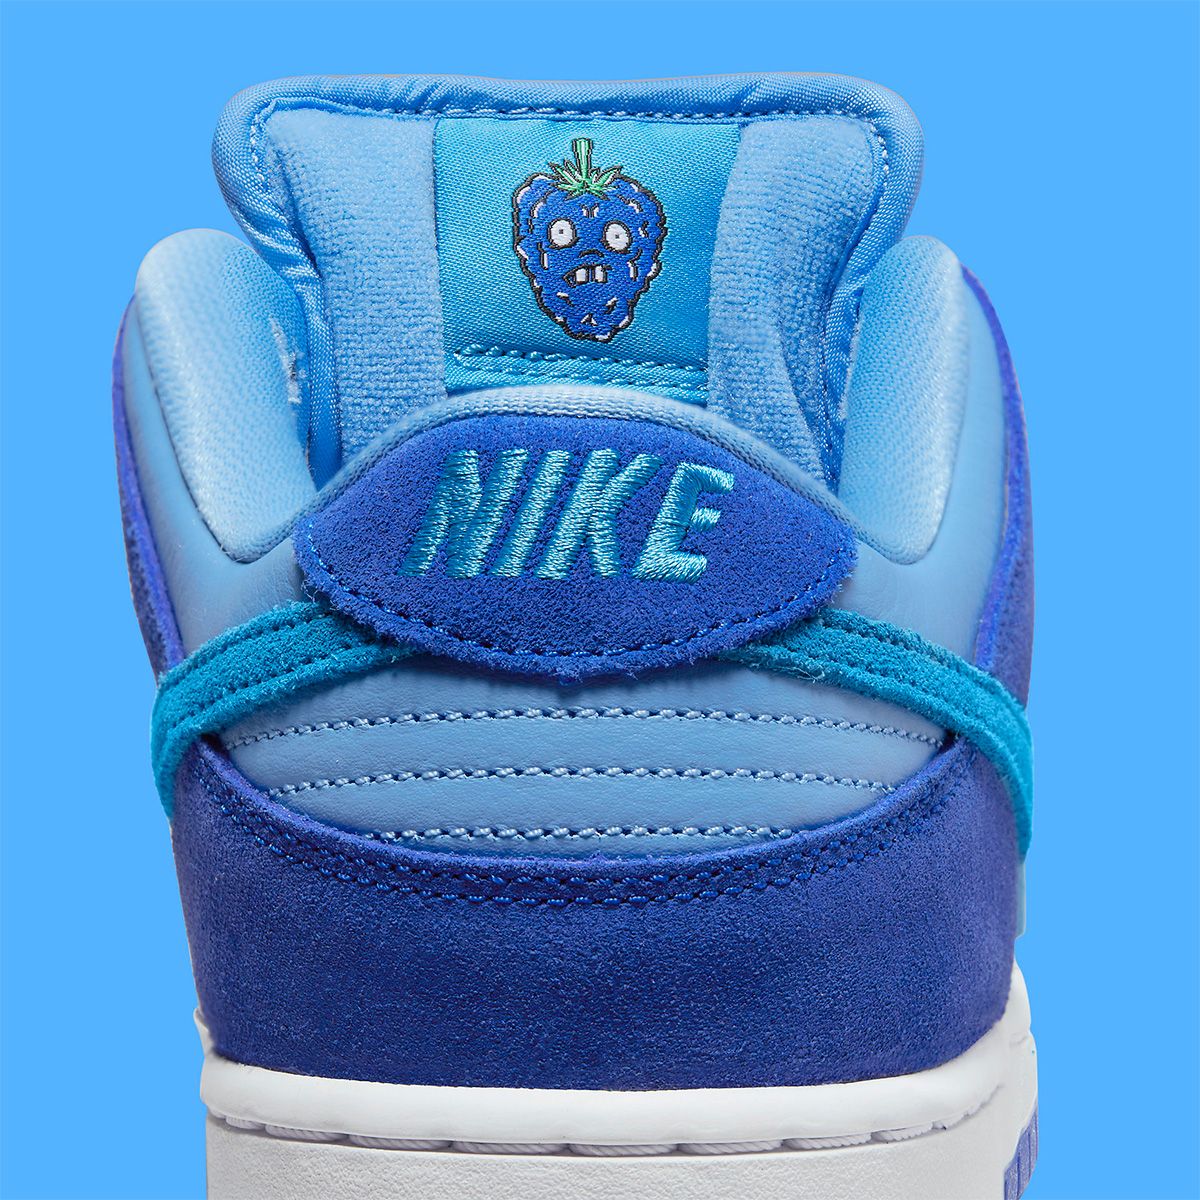 Official blue nike sb dunks Images // Nike SB Dunk Low "Blue Raspberry" | HOUSE OF HEAT